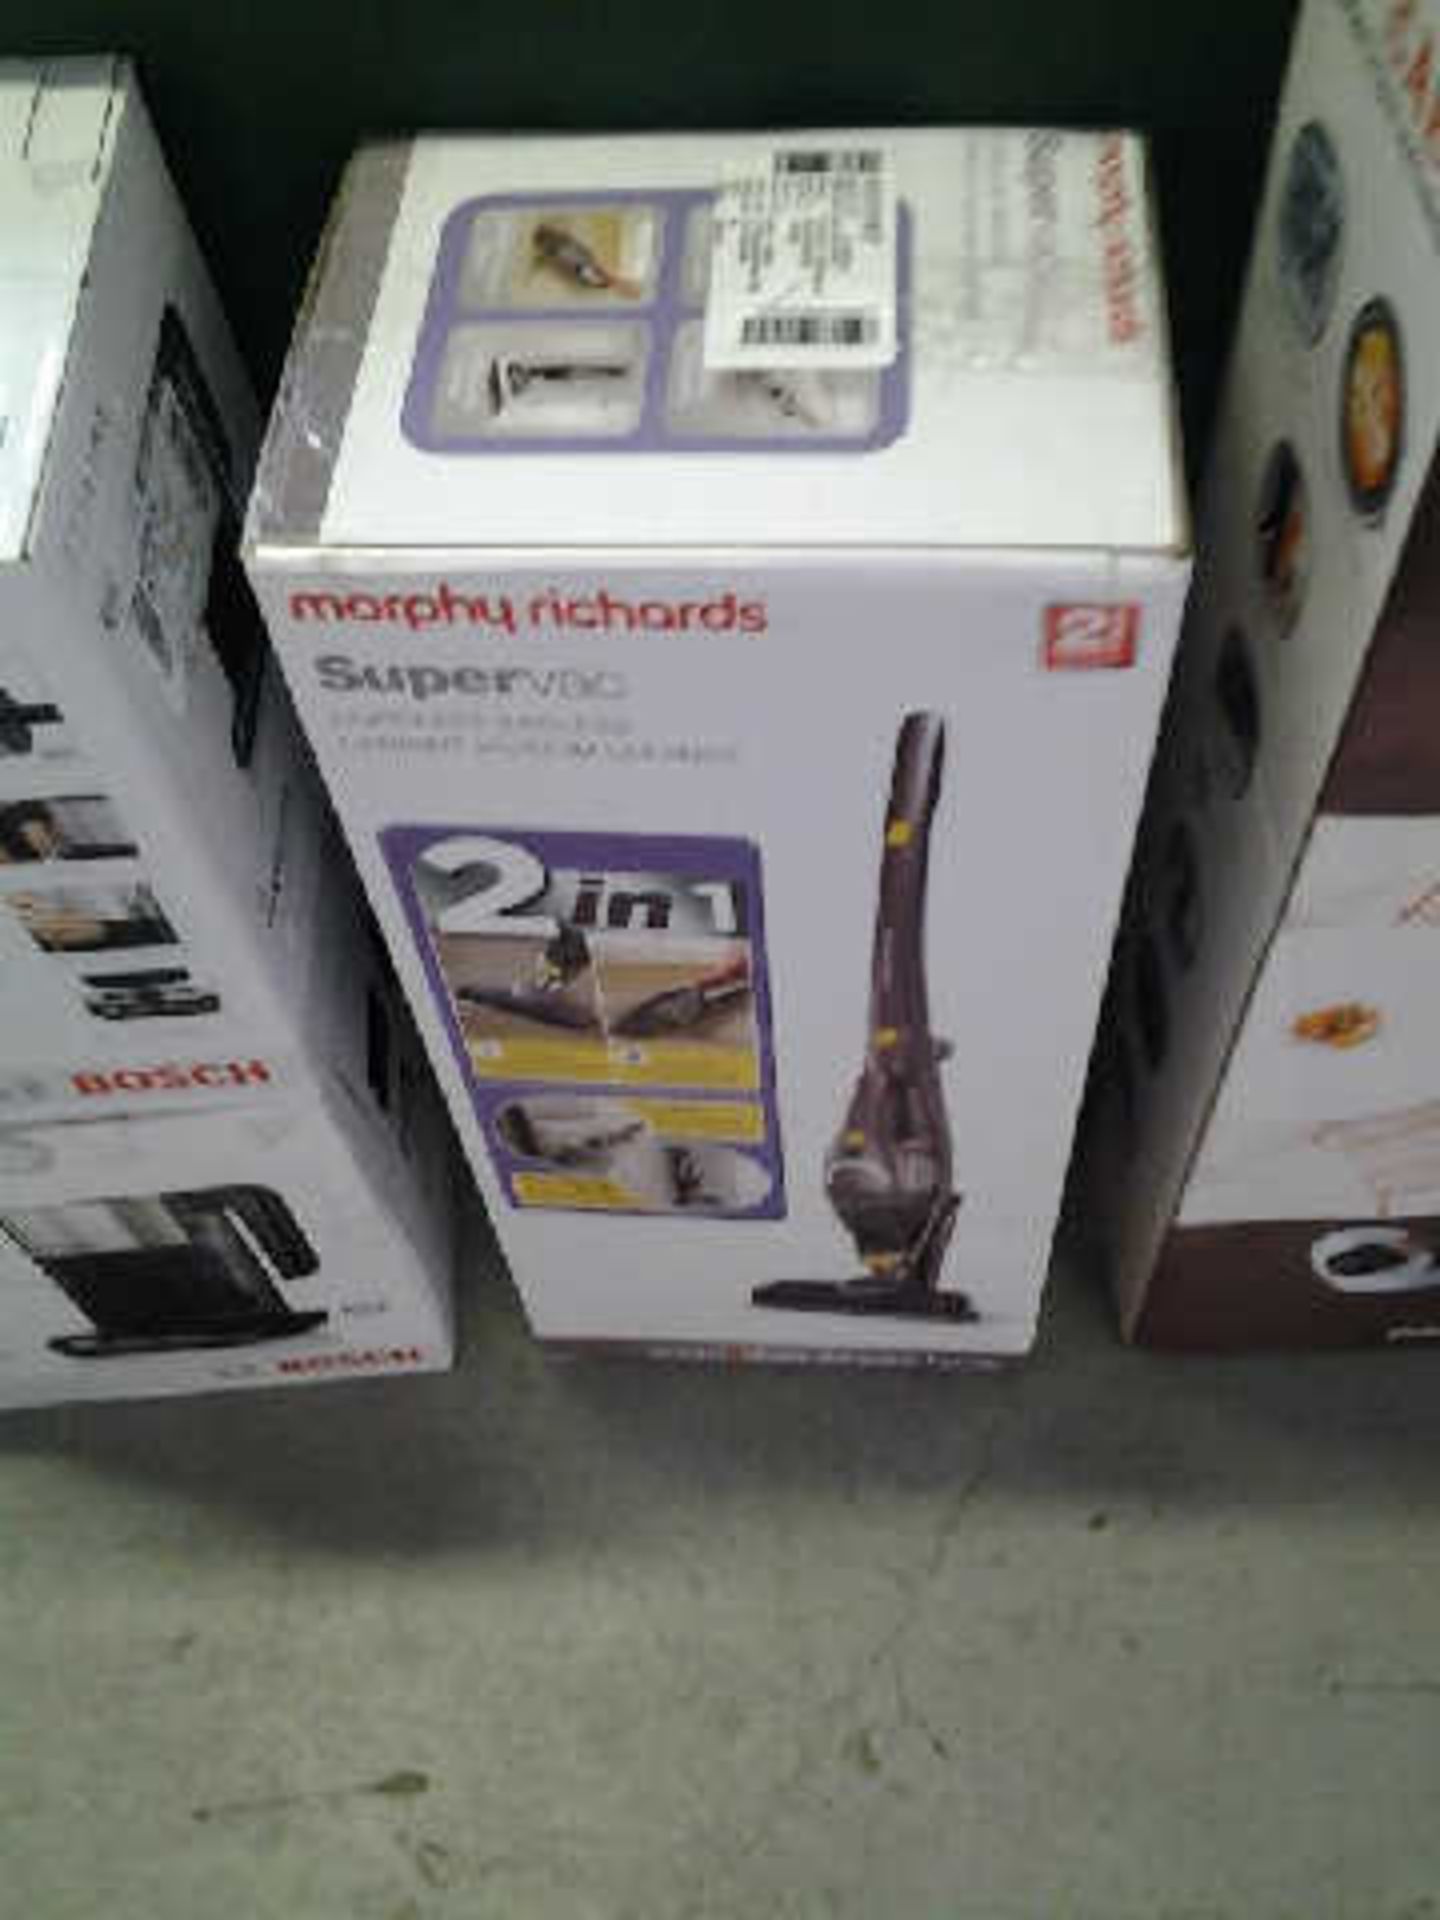 1 X BOXED MORPHY RICHARDS SUPERVAC VACUUM CLEANER - Image 3 of 3